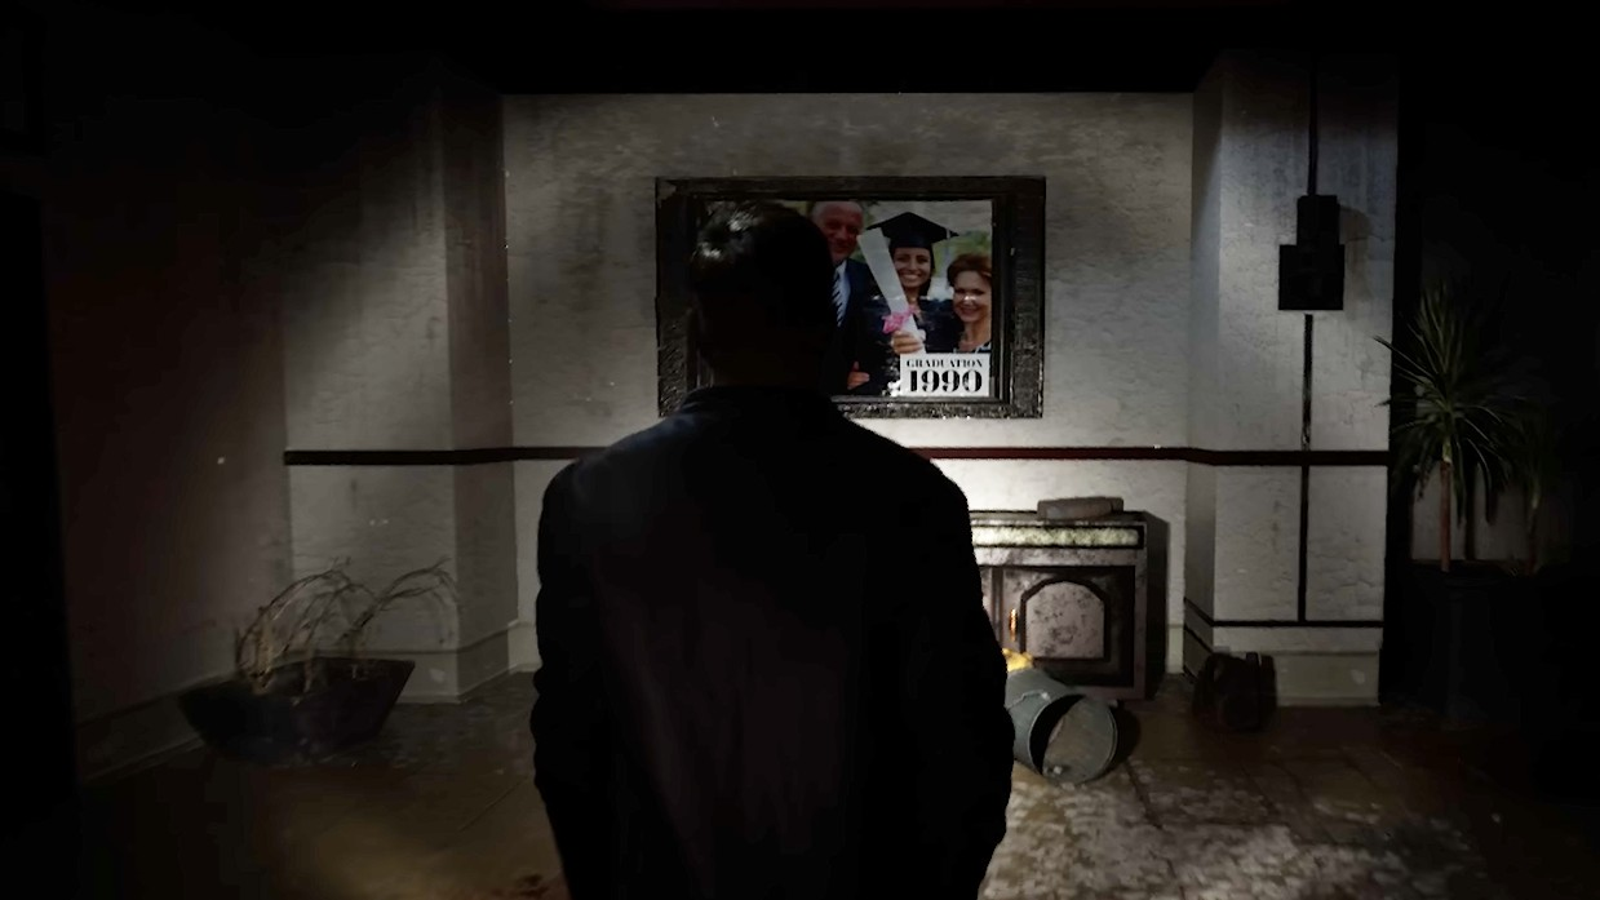 Max Payne Remake on Unreal Engine 5 Showcased in This Fan Trailer